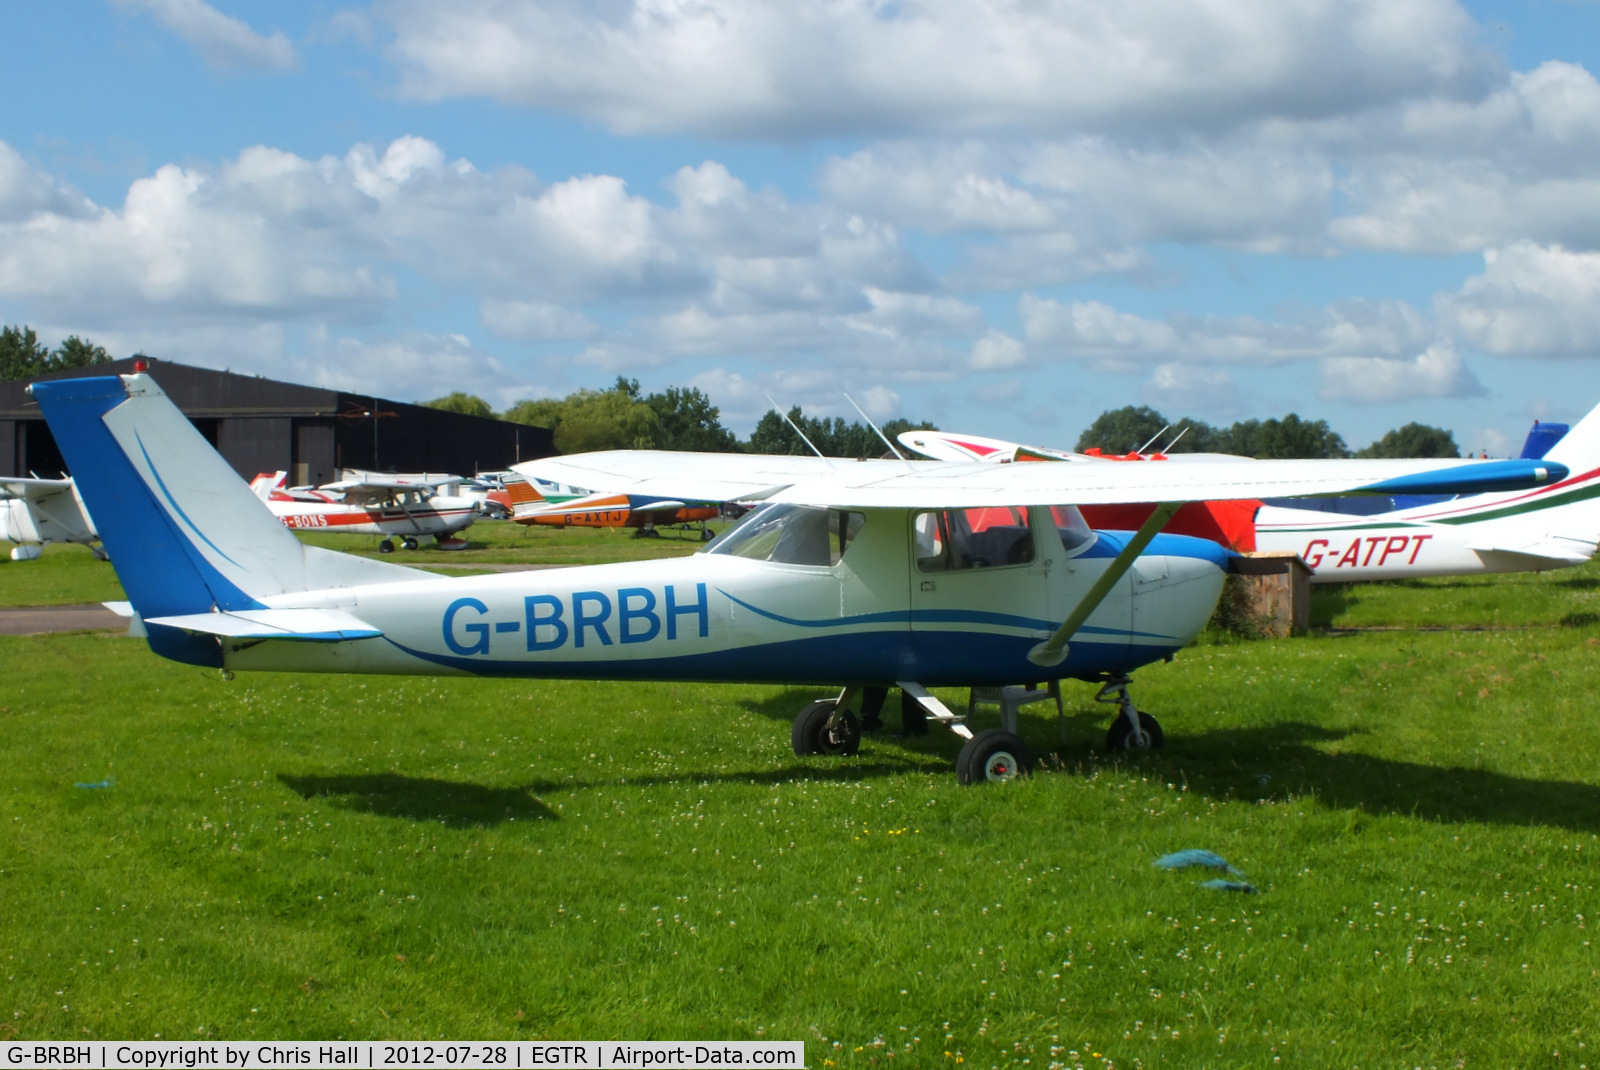 G-BRBH, 1968 Cessna 150H C/N 150-69283, privately owned